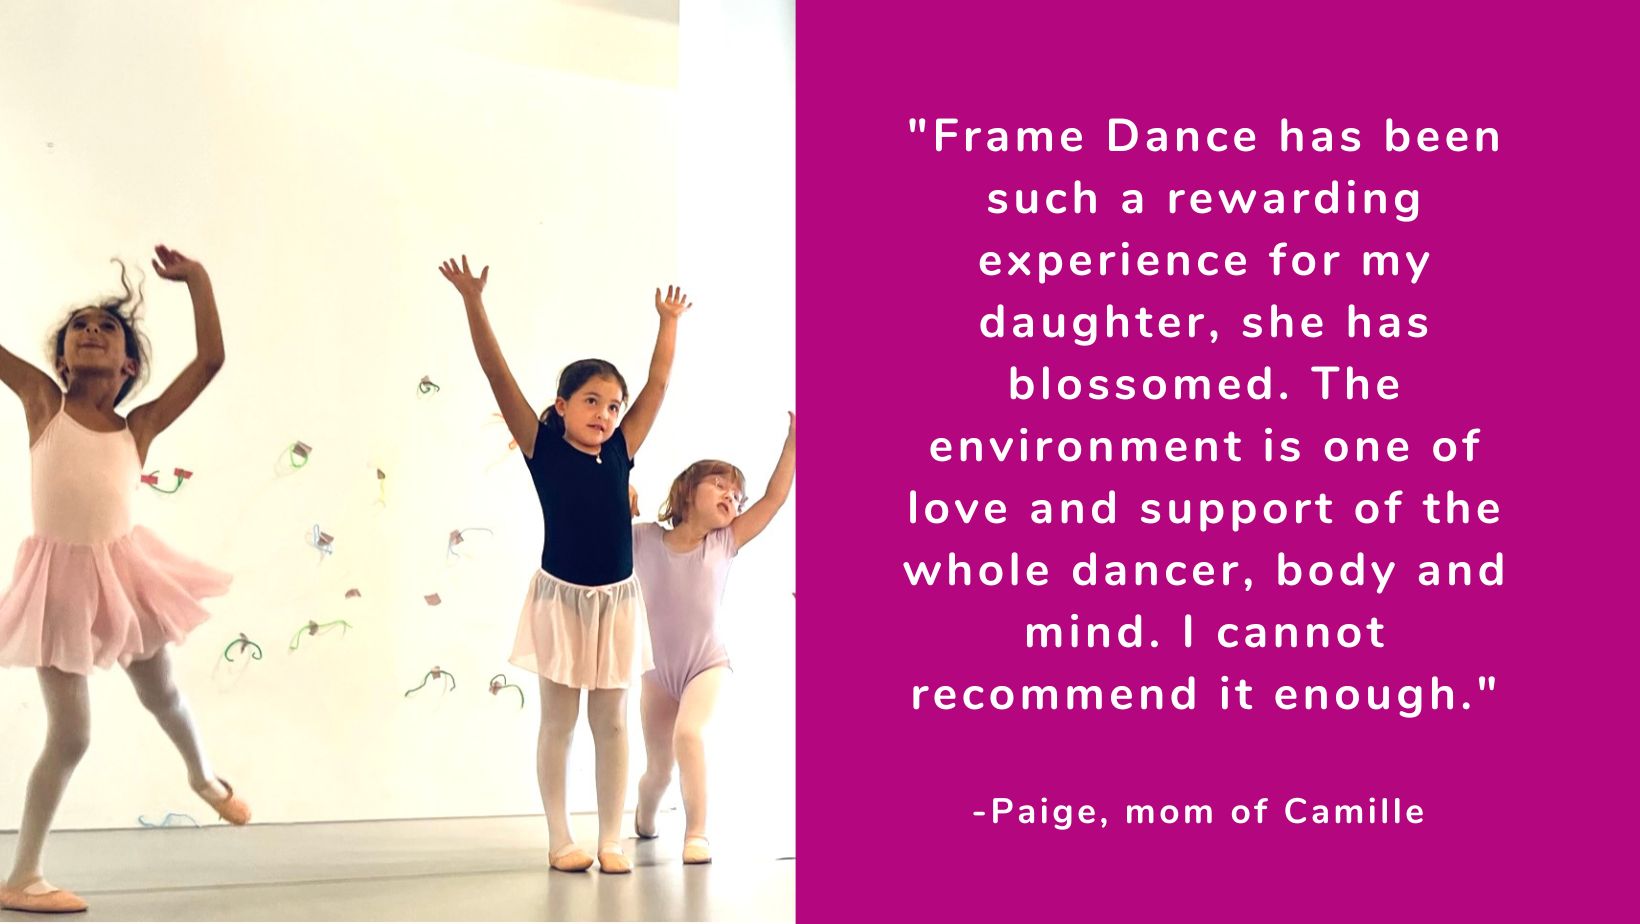 "Frame Dance has been such a rewarding experience for my daughter, she has blossomed. The environment is one of love and support of the whole dancer, body and mind. I cannot recommend it enough." -Paige, mom of Camille